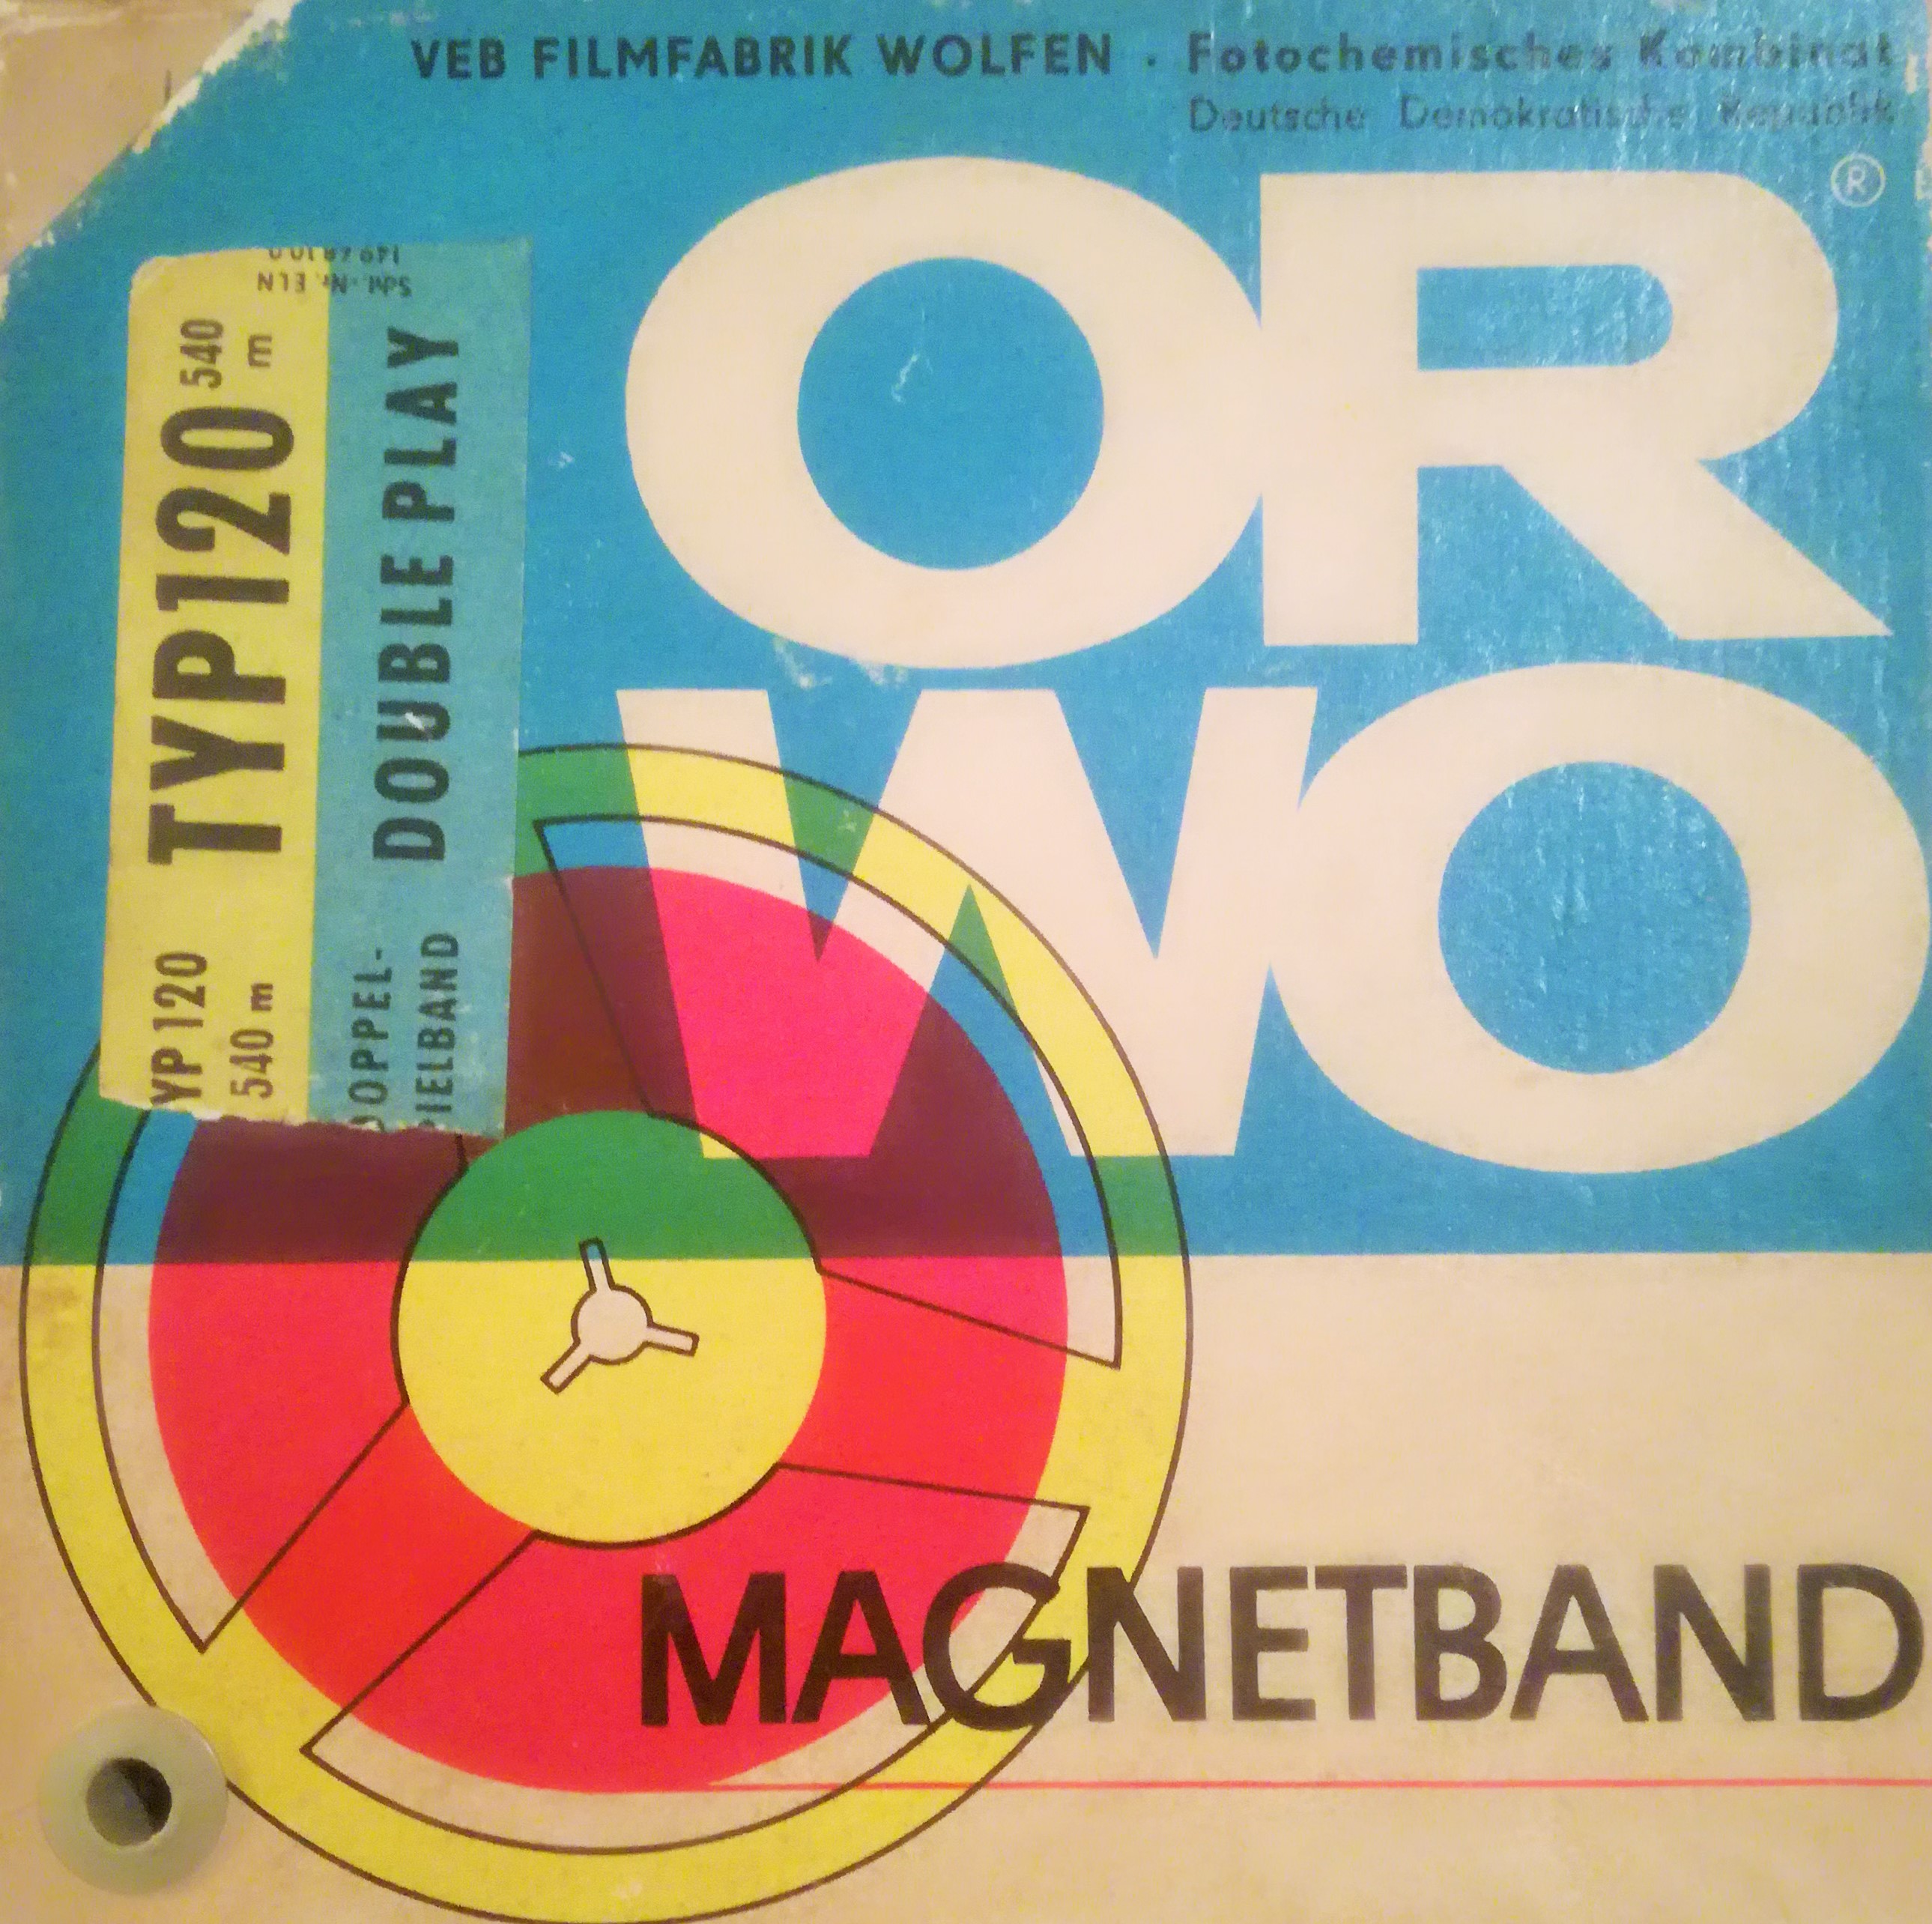 ORWO magnetic tape with Cat Radio recordings from the 1970s